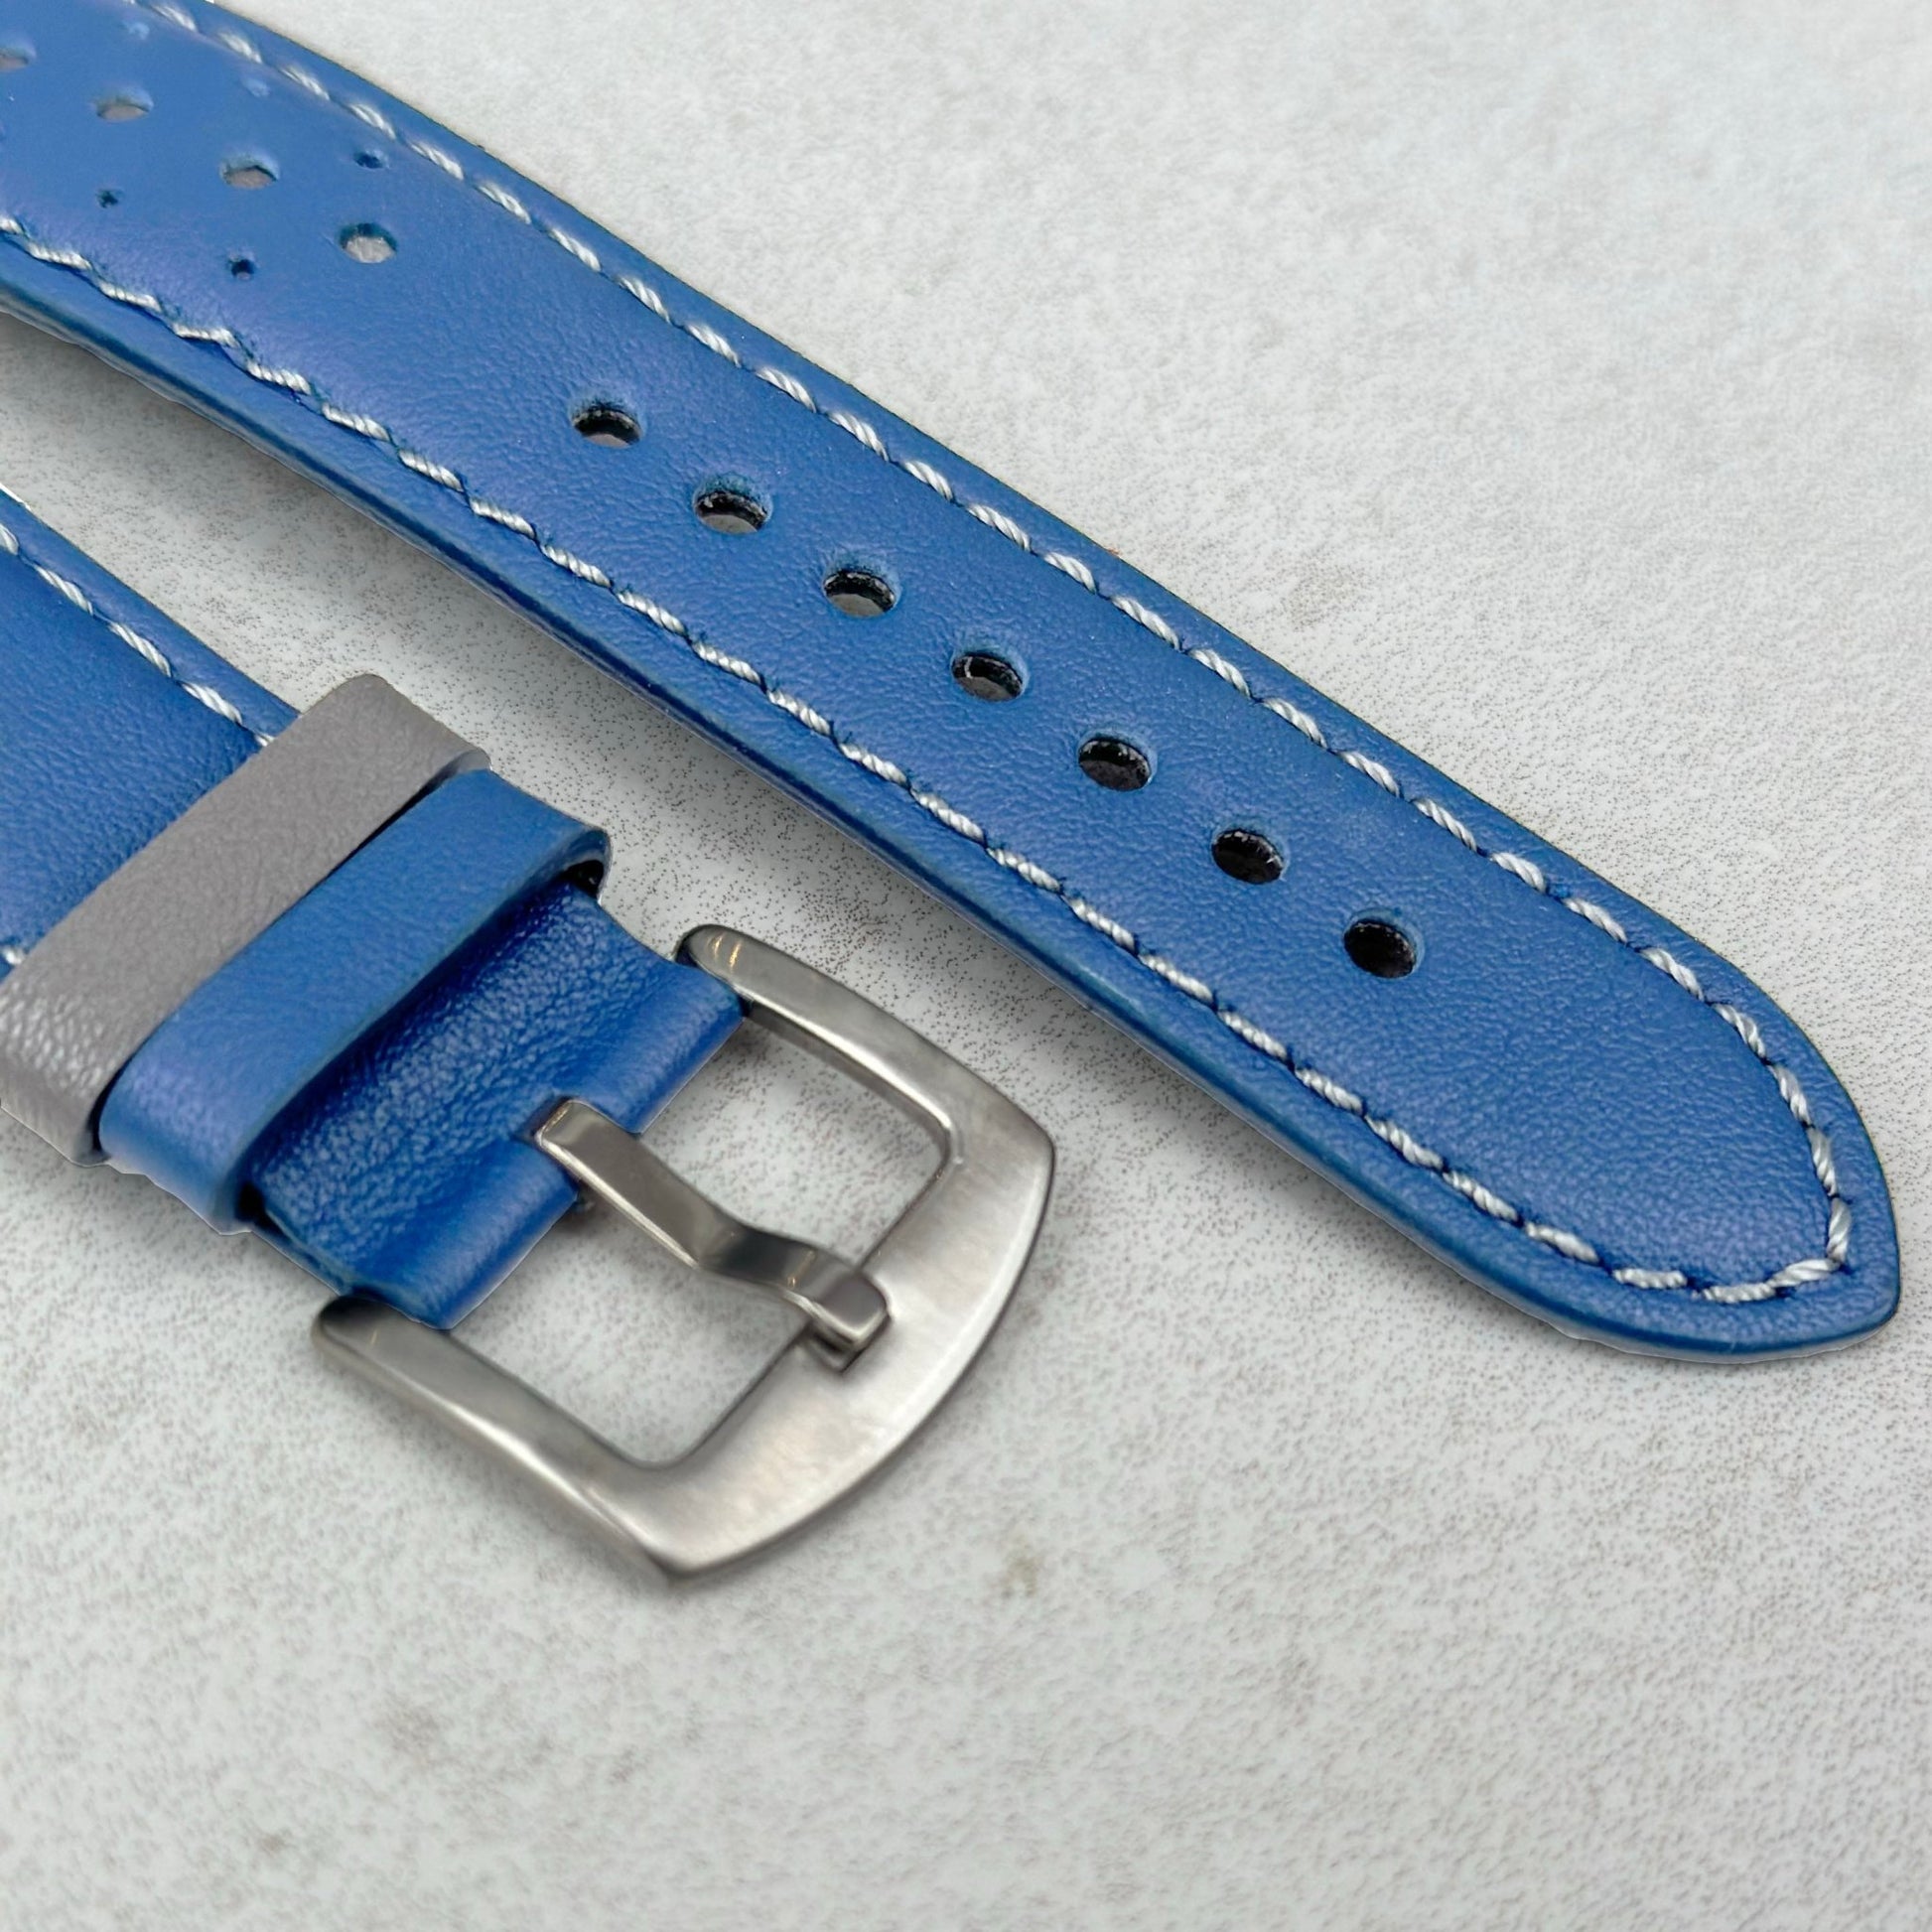 Brushed 316L stainless steel buckle on the Le Mans blue and grey racing watch strap.